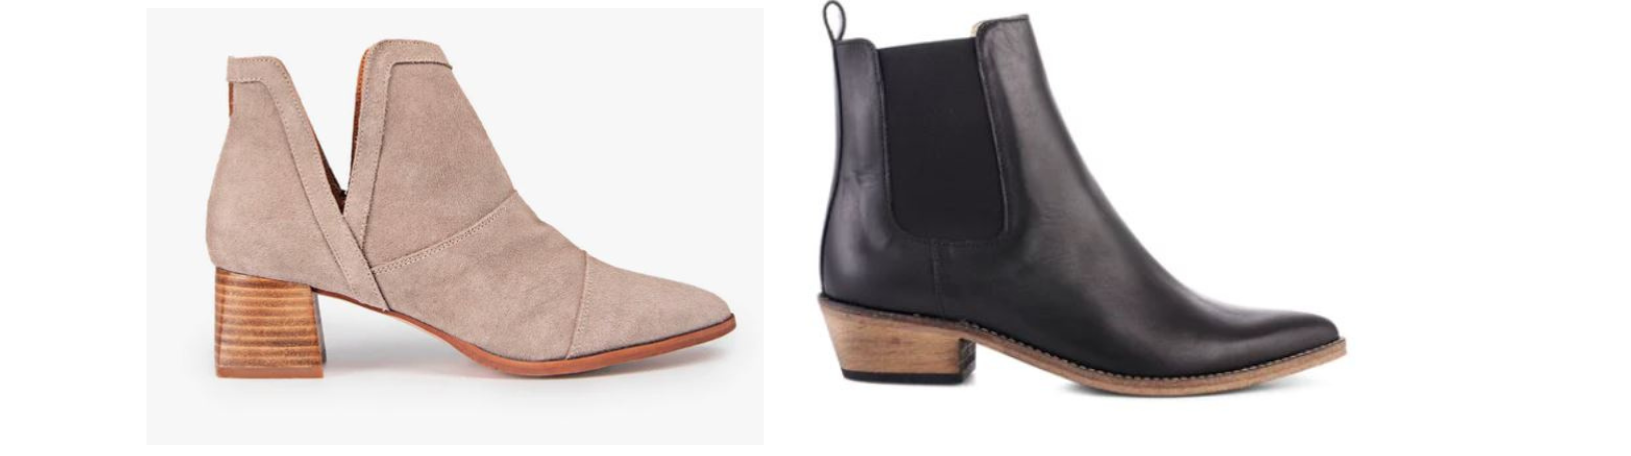 Western inspired ankle boot styles